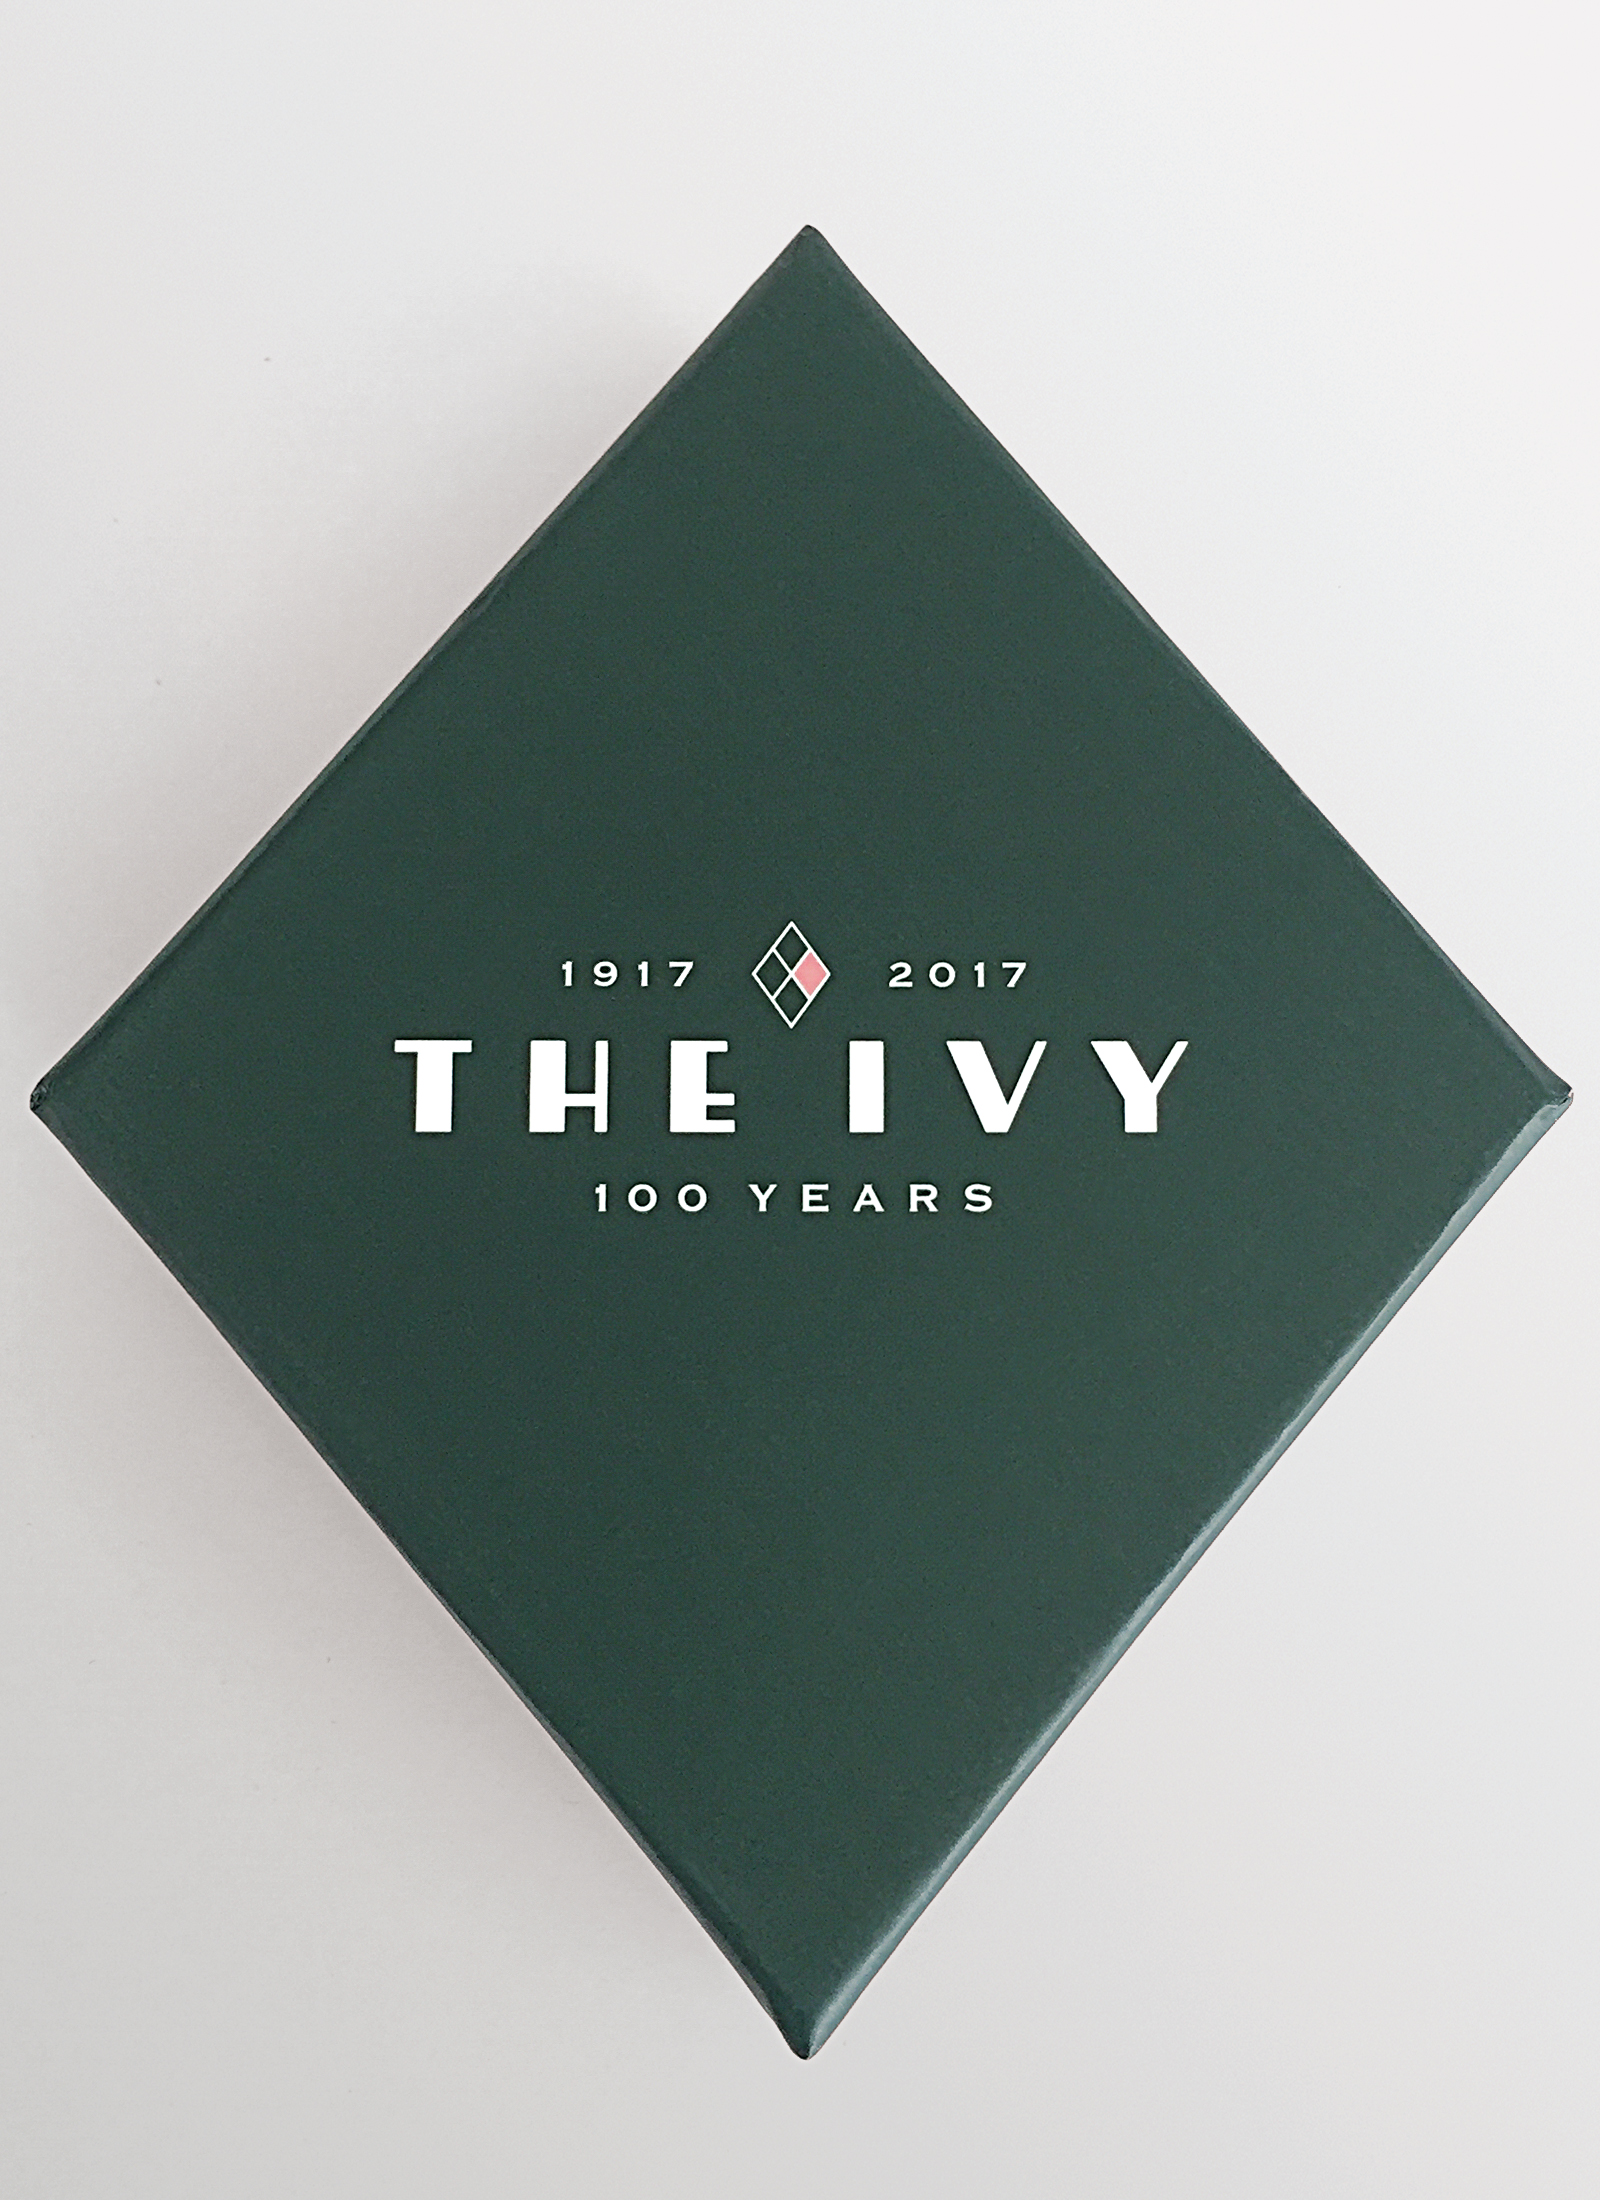 The Ivy celebrate 100 Years with Chocolate Box